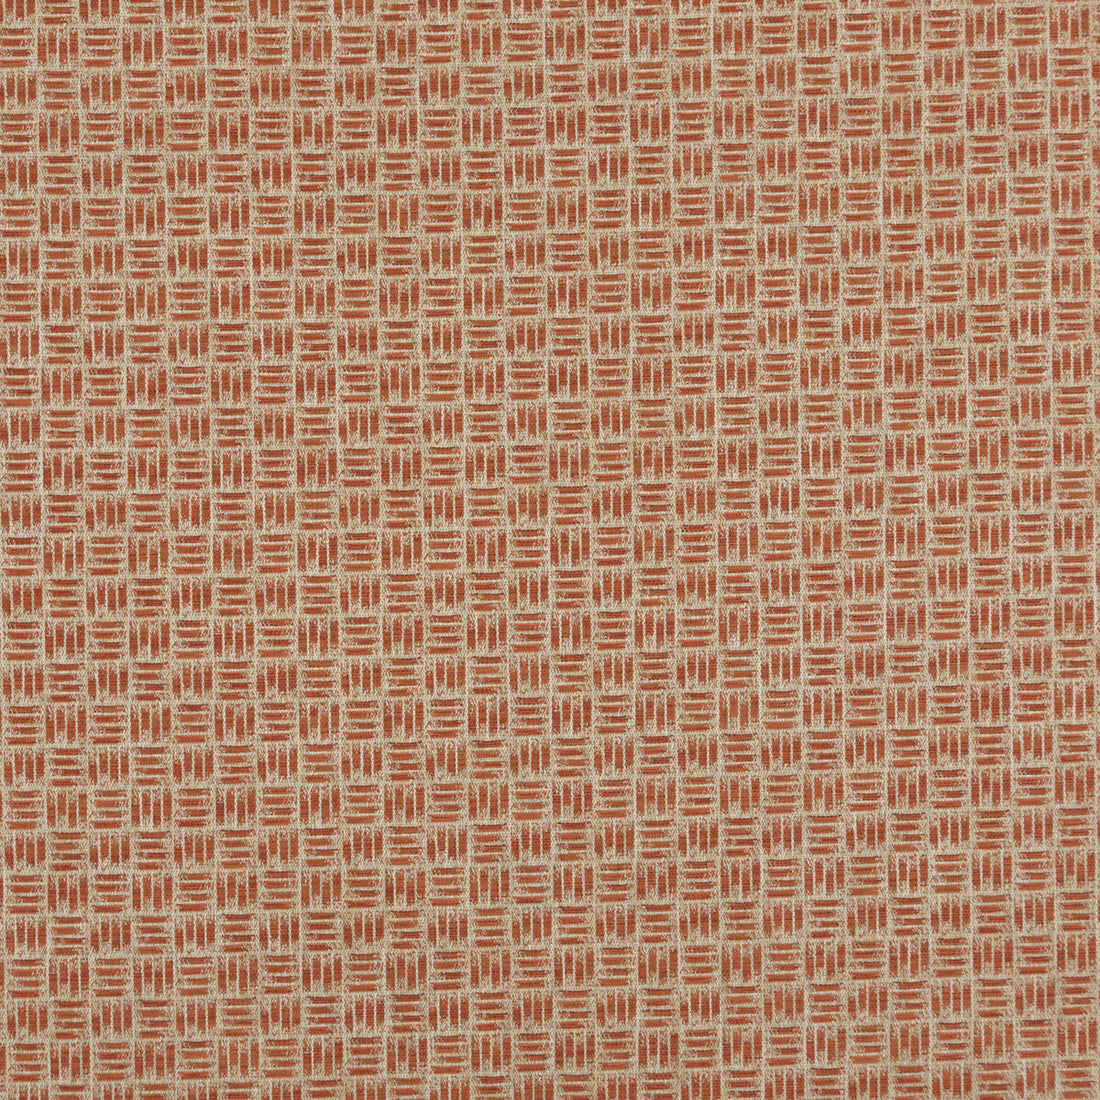 Seismic fabric in spice color - pattern BF10687.330.0 - by G P &amp; J Baker in the Essential Colours collection